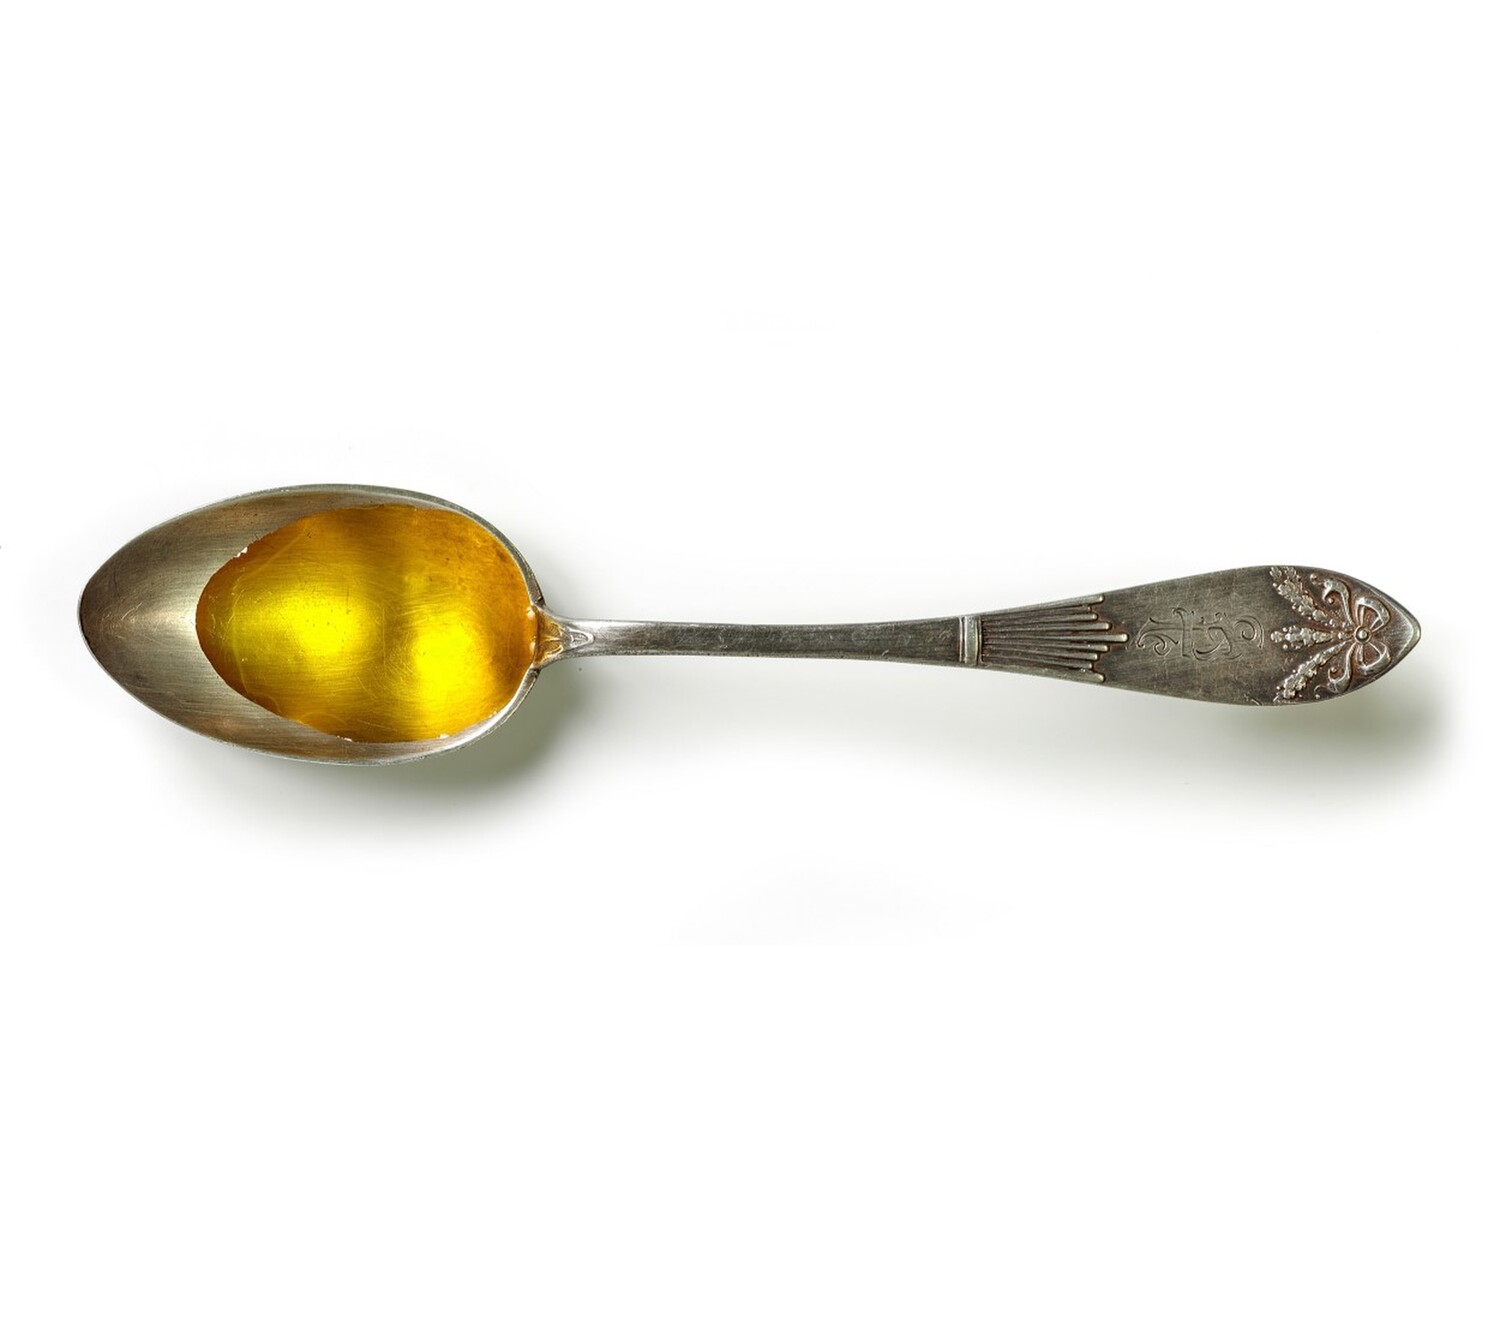 Just a spoonful